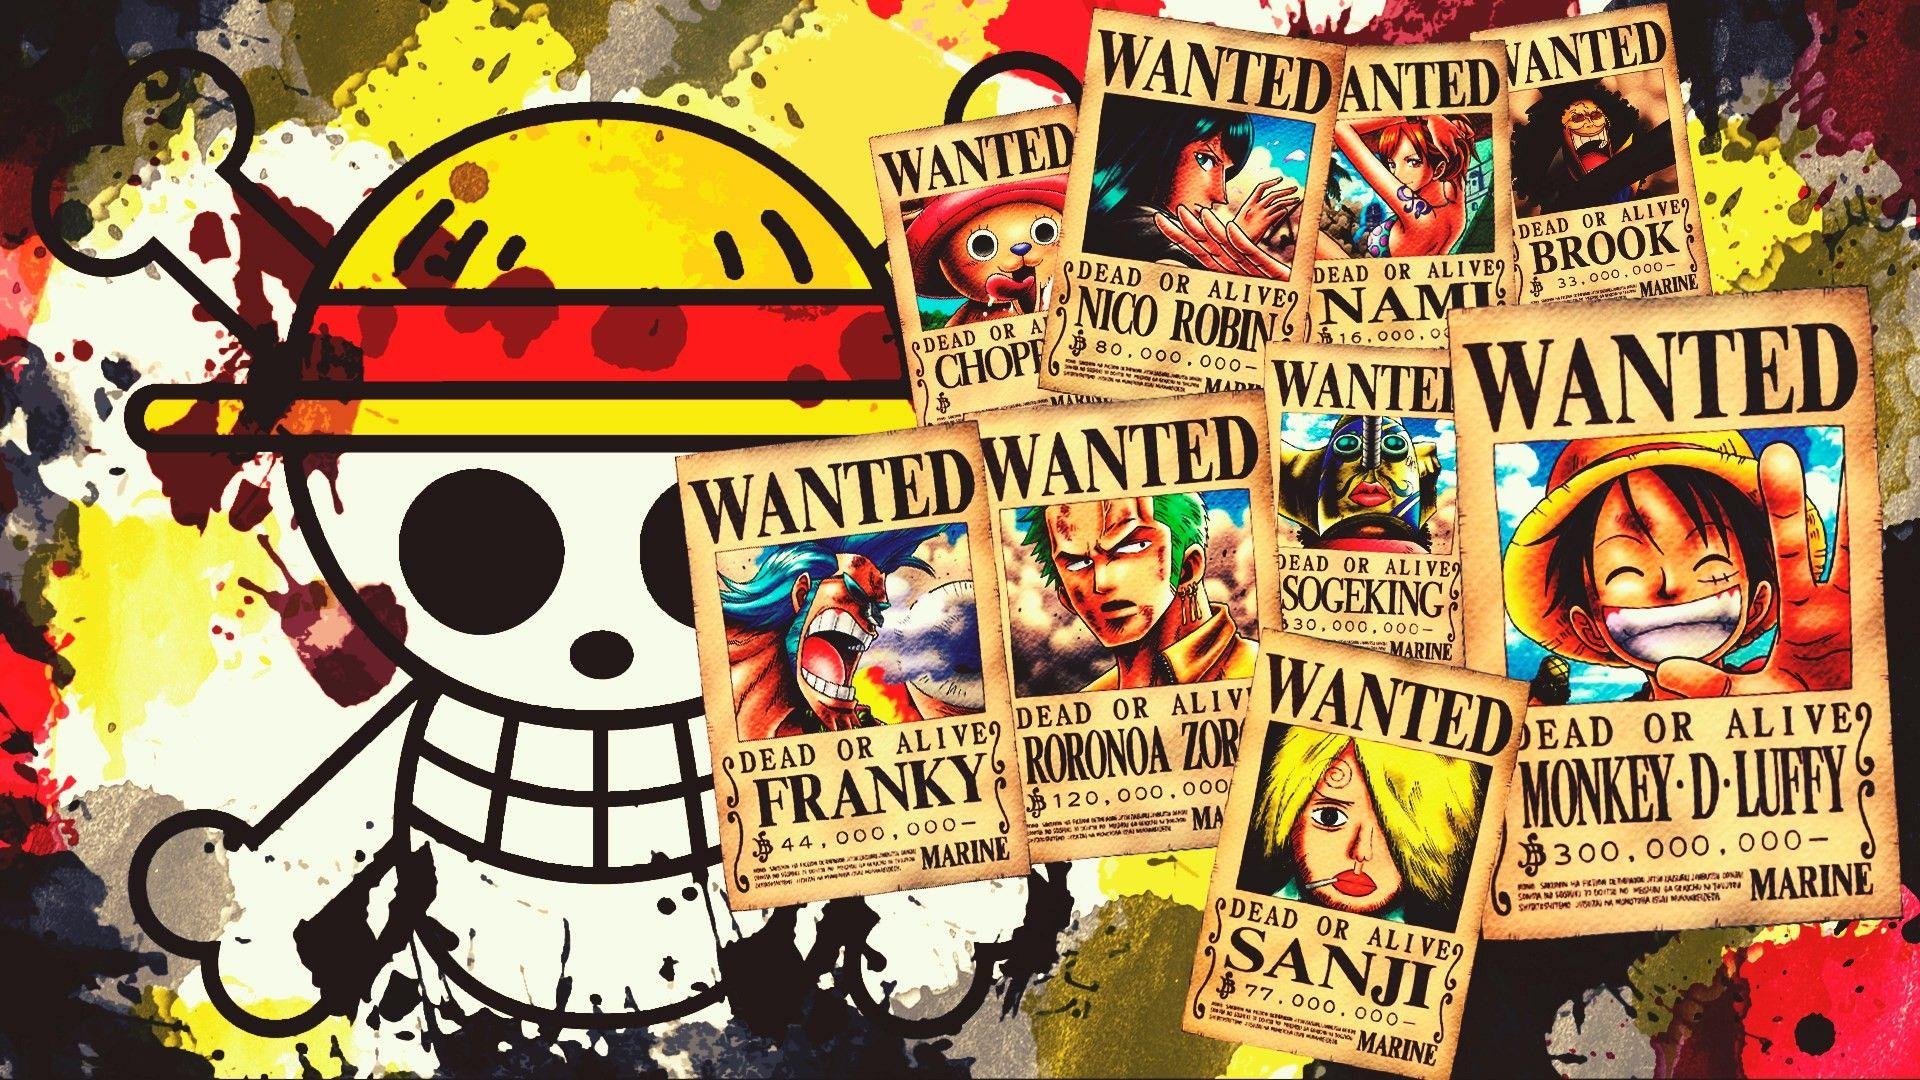 One Piece Wallpapers HD 1920x1080 - Wallpaper Cave